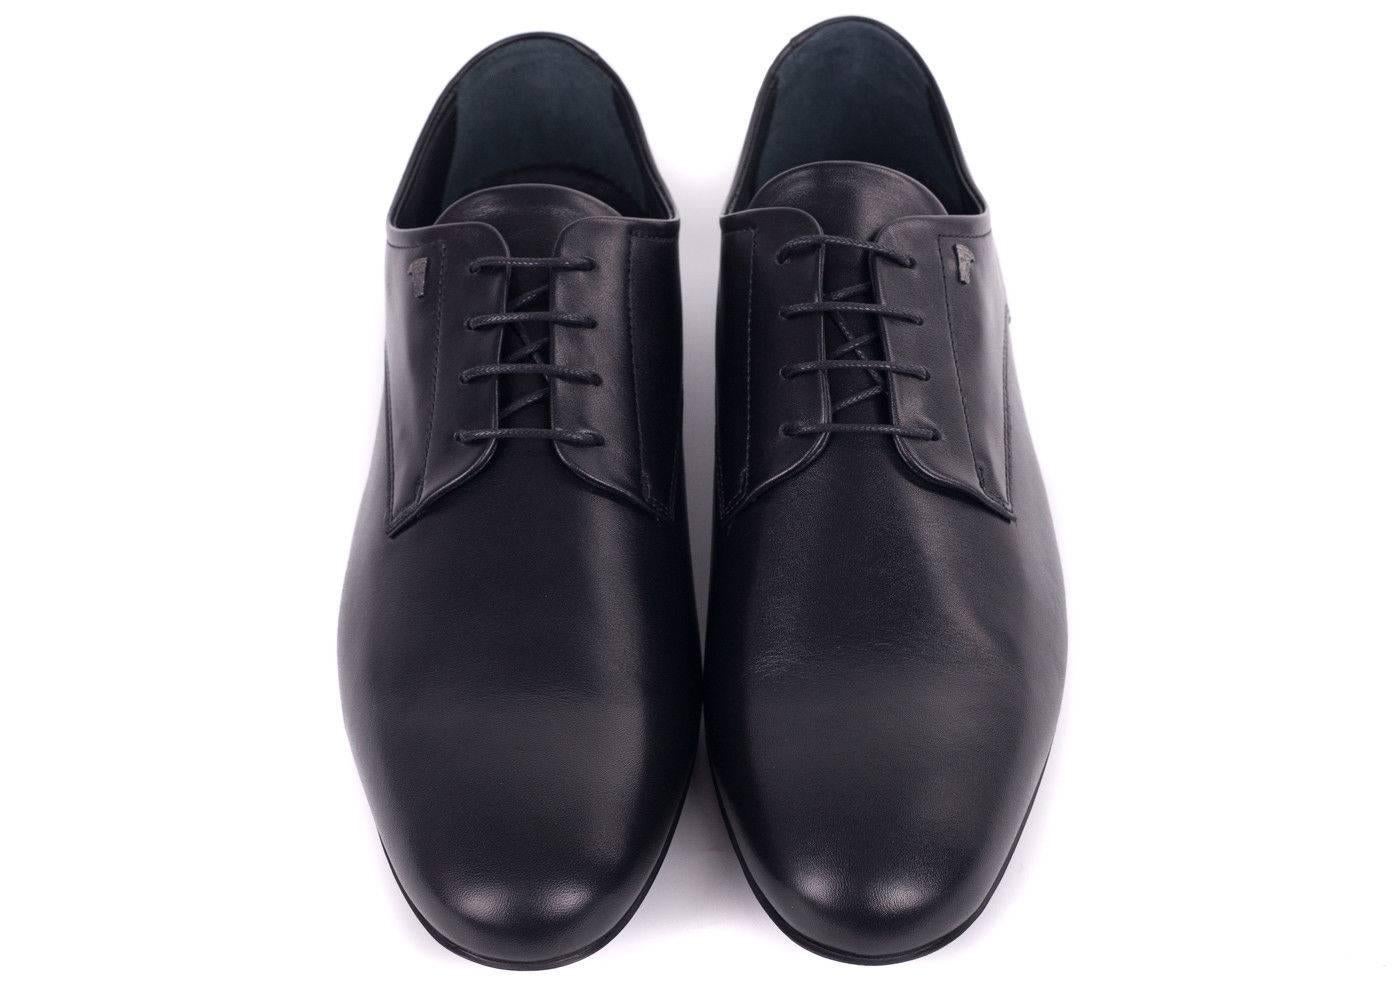 Arrive prepared for the event or occasion in your Versace Collection Derby's. This streamlined leather pair features a smooth genuine leather base, small medusa head emblem, and tonal laces. You can pair these shoes with stuctured trousers and